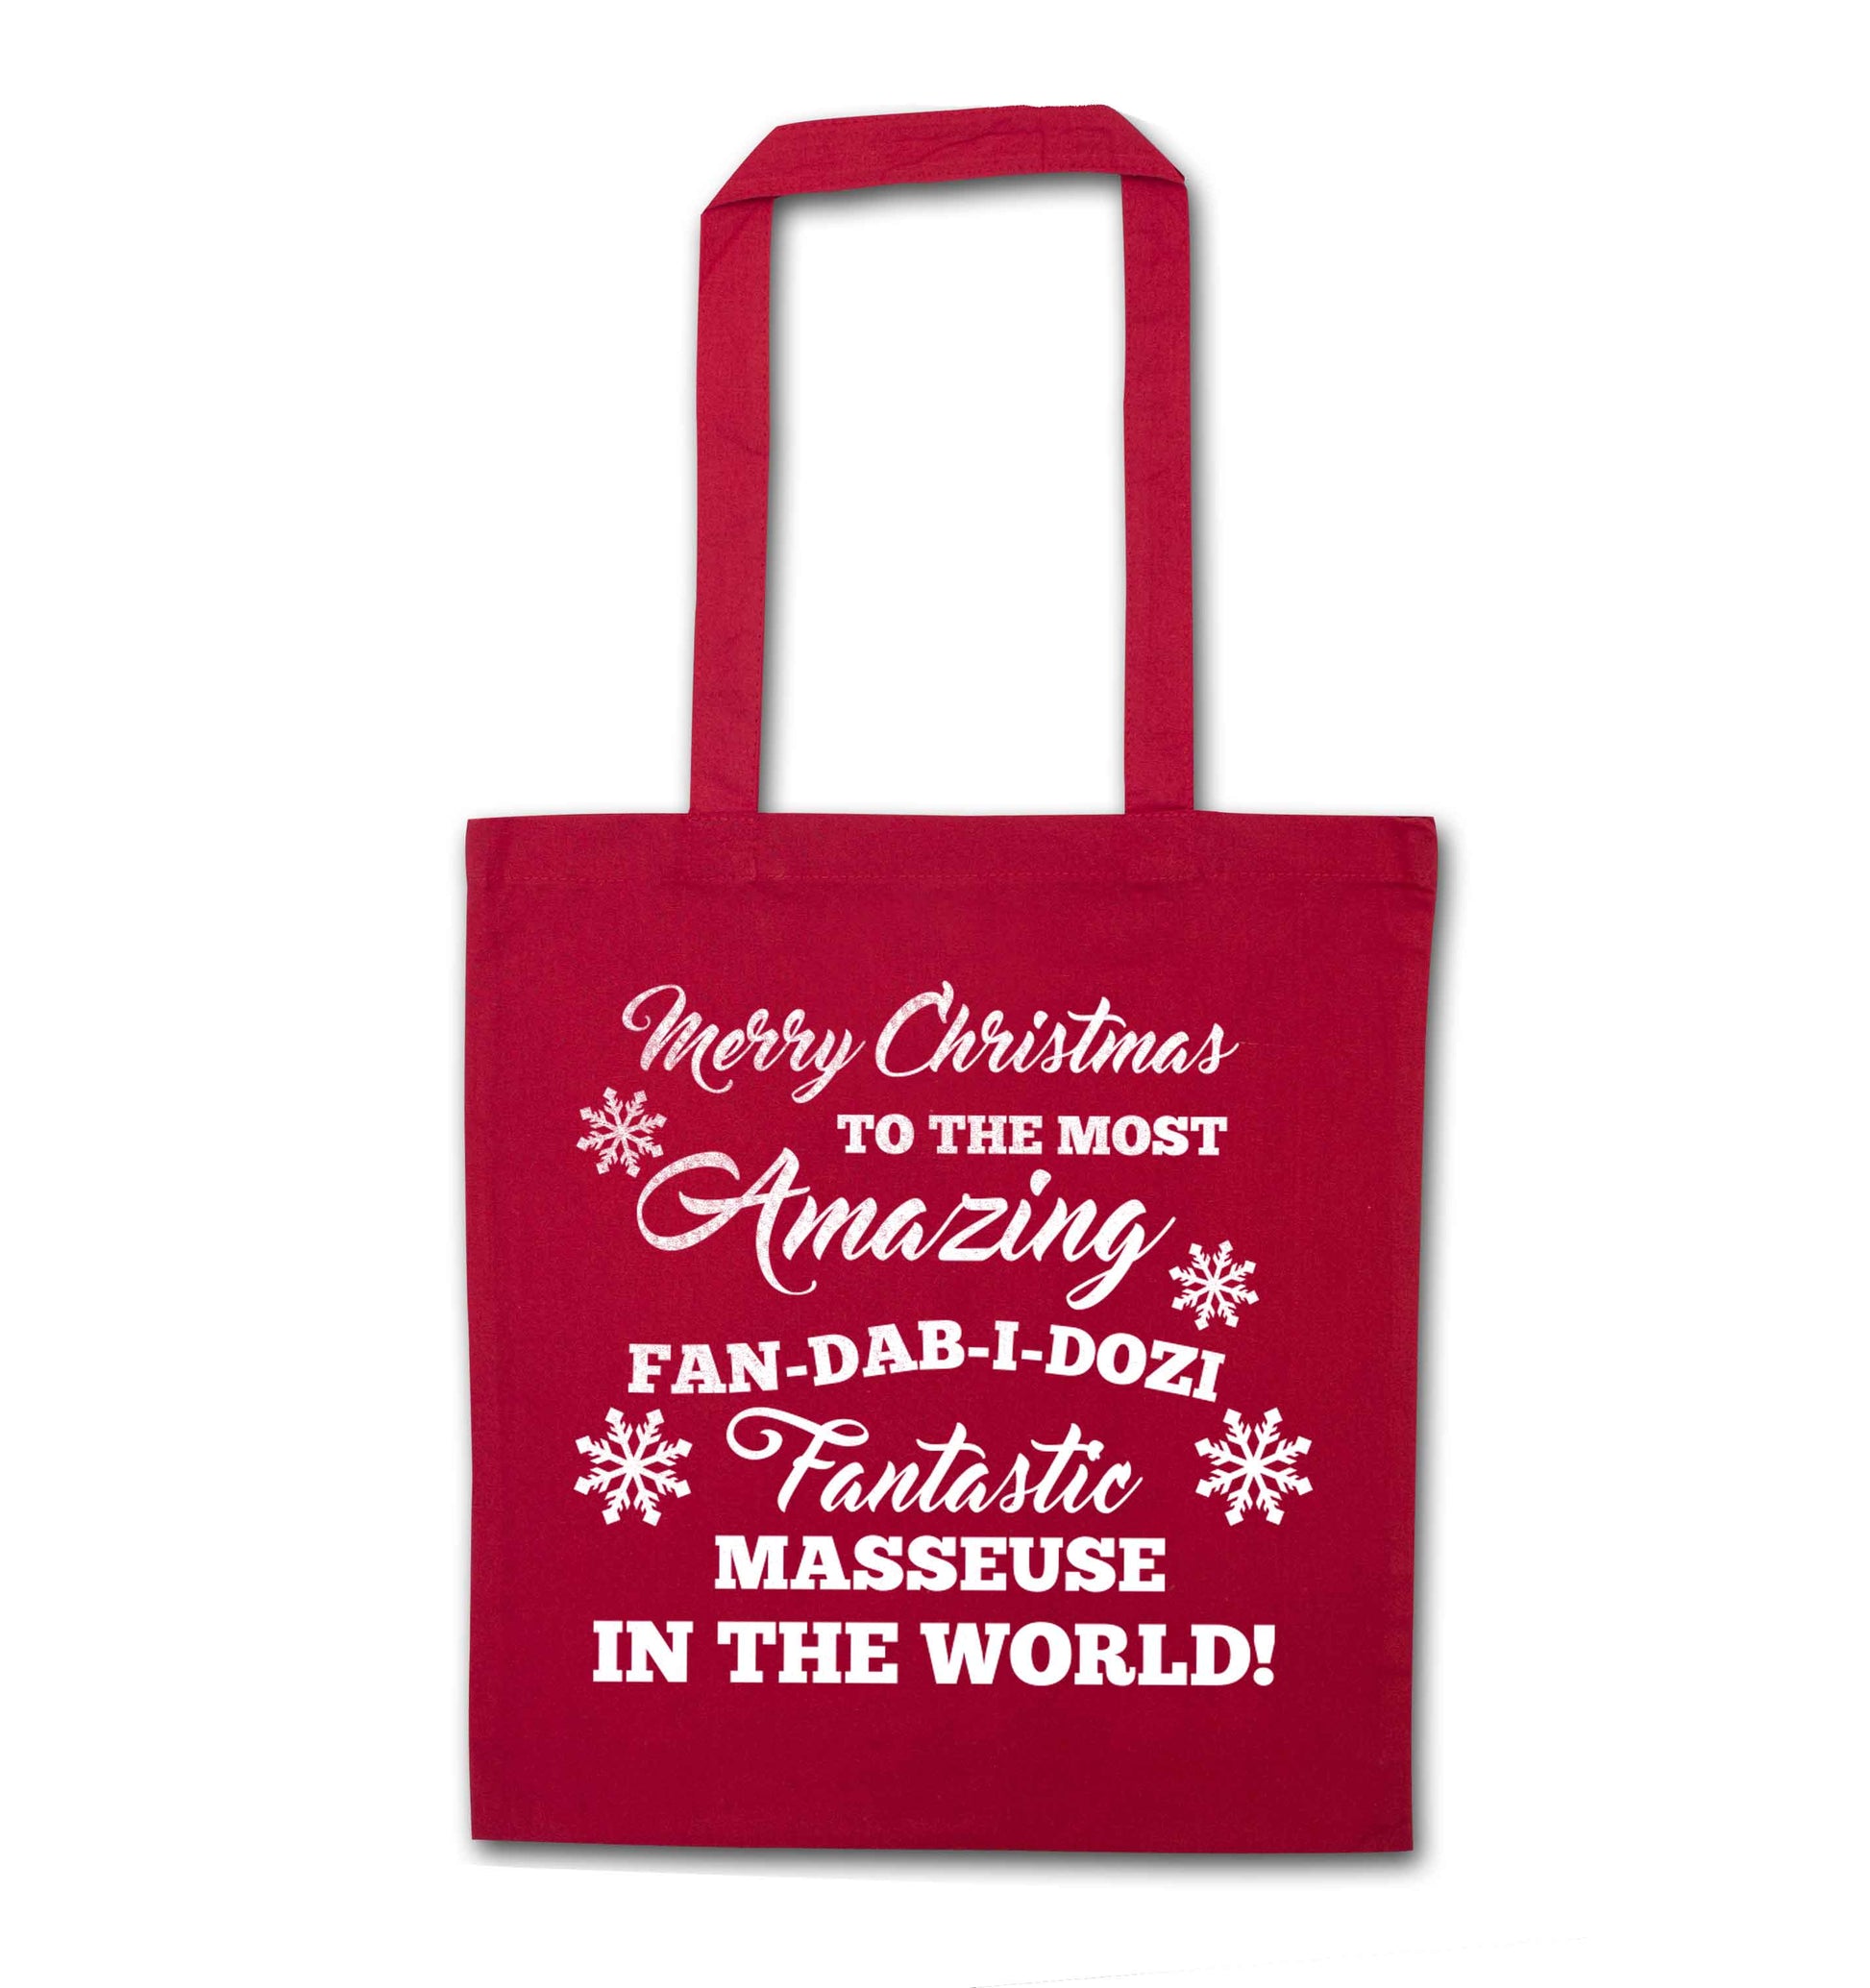 Merry Christmas to the most amazing fan-dab-i-dozi fantasic masseuse in the world red tote bag